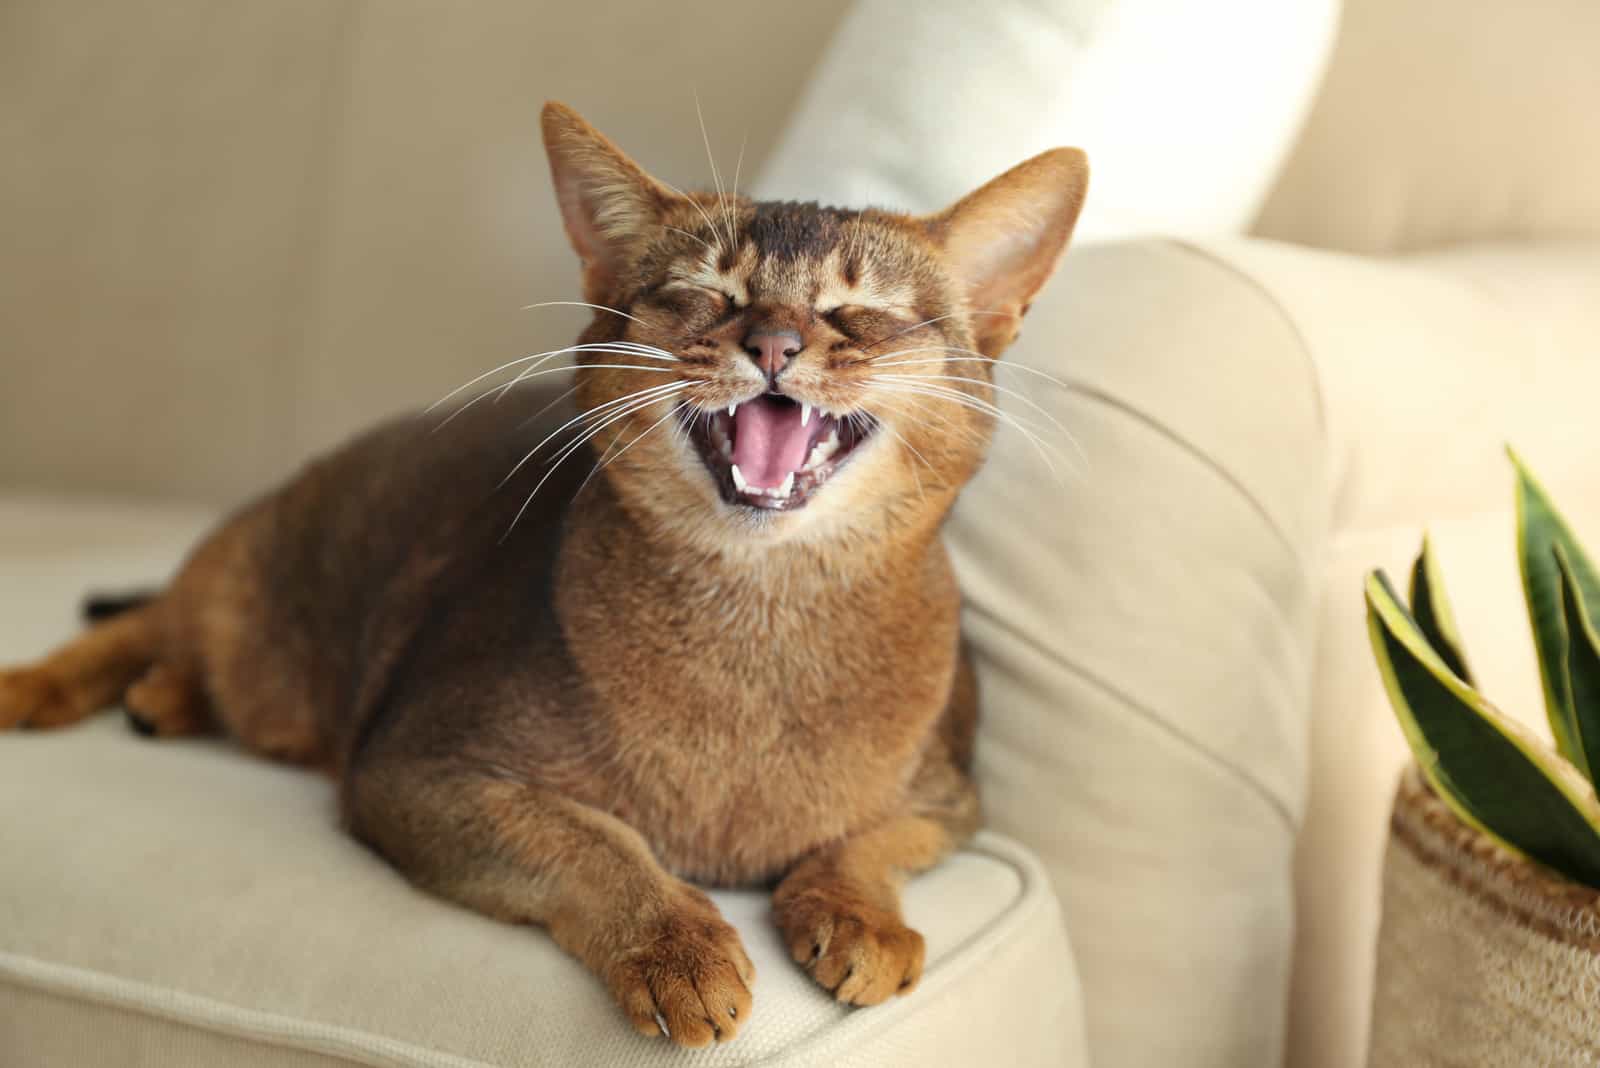 Cat Meowing while sitting on sofa